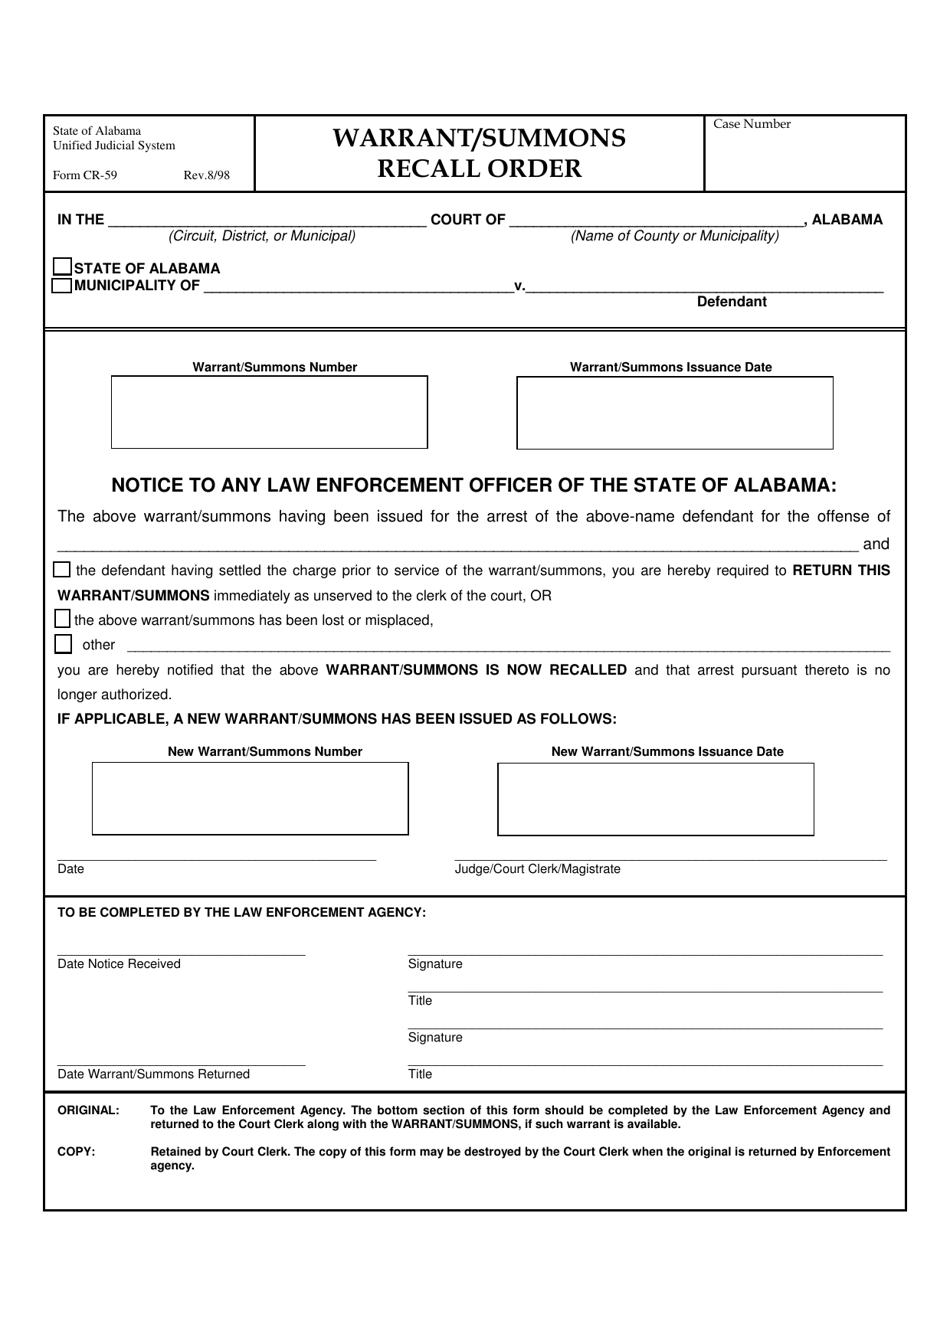 Form CR-59 Warrant / Summons Recall Order - Alabama, Page 1